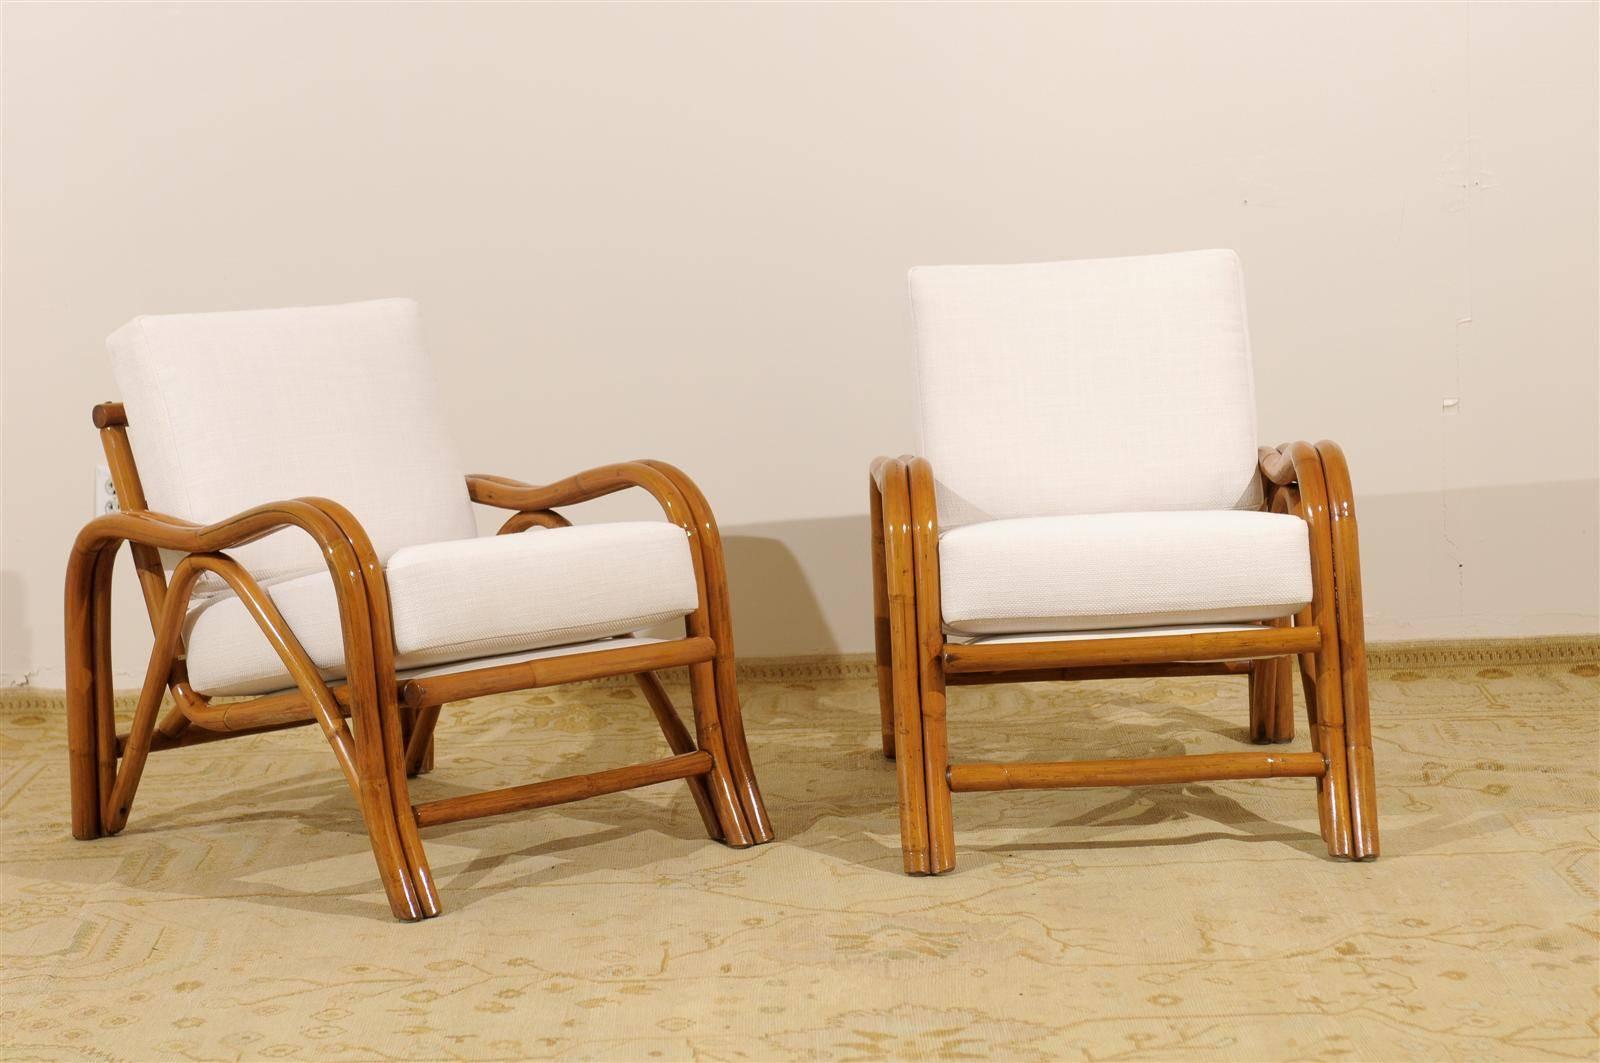 An exceptional pair of vintage modern loungers, circa 1950. Stout, expertly made rattan frame construction. Beautiful design and detail. Room defining statement pieces. The matching three (3) seat sofa is available in a separate listing, making a